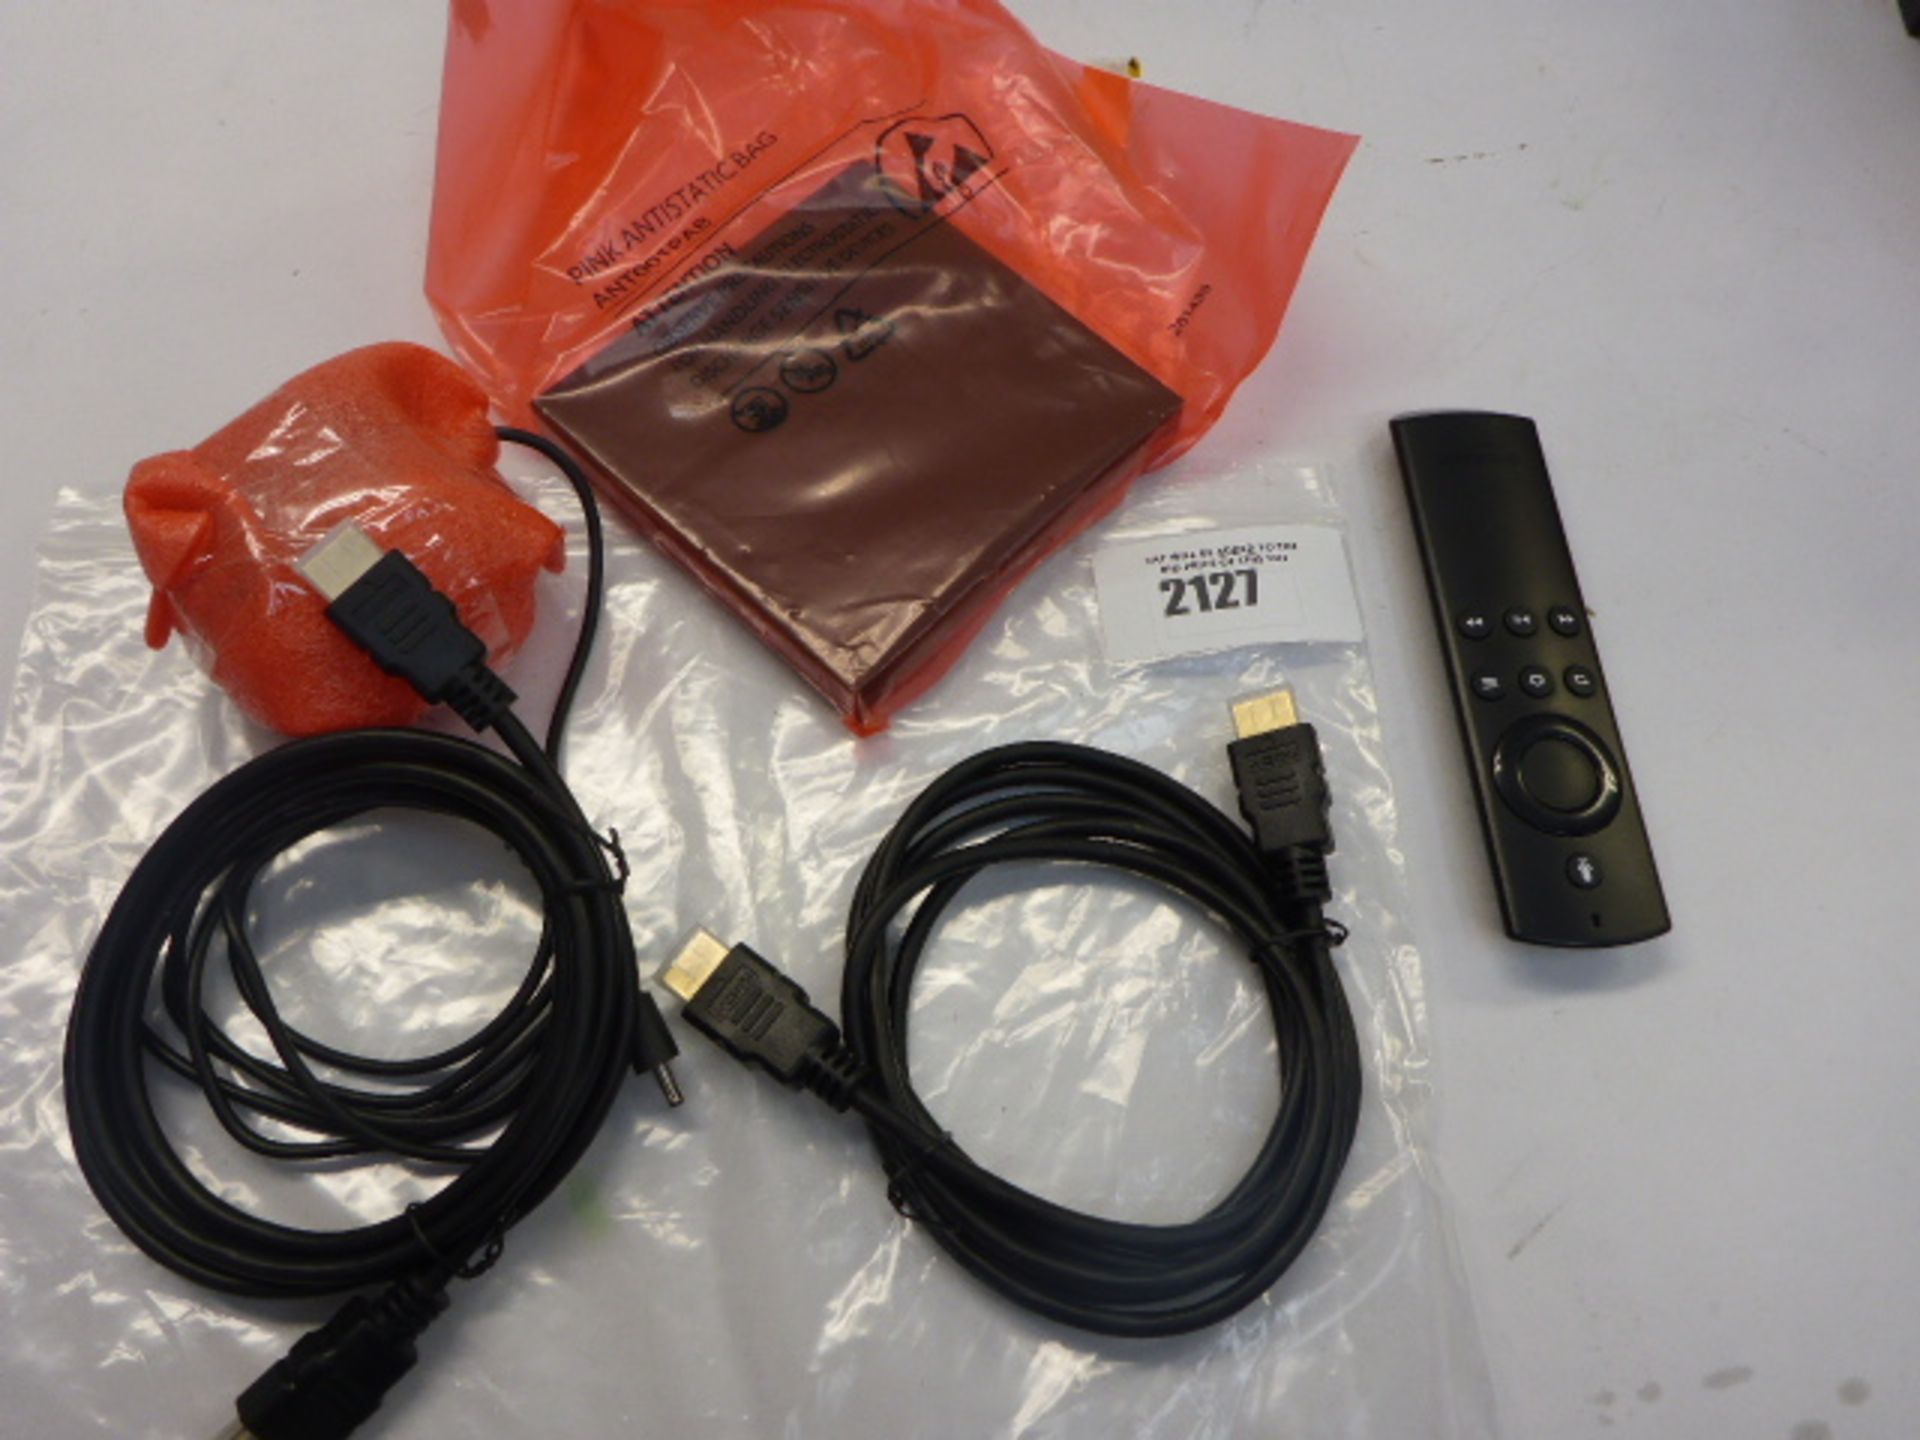 Amazon Fire TV Box with remote and cables.